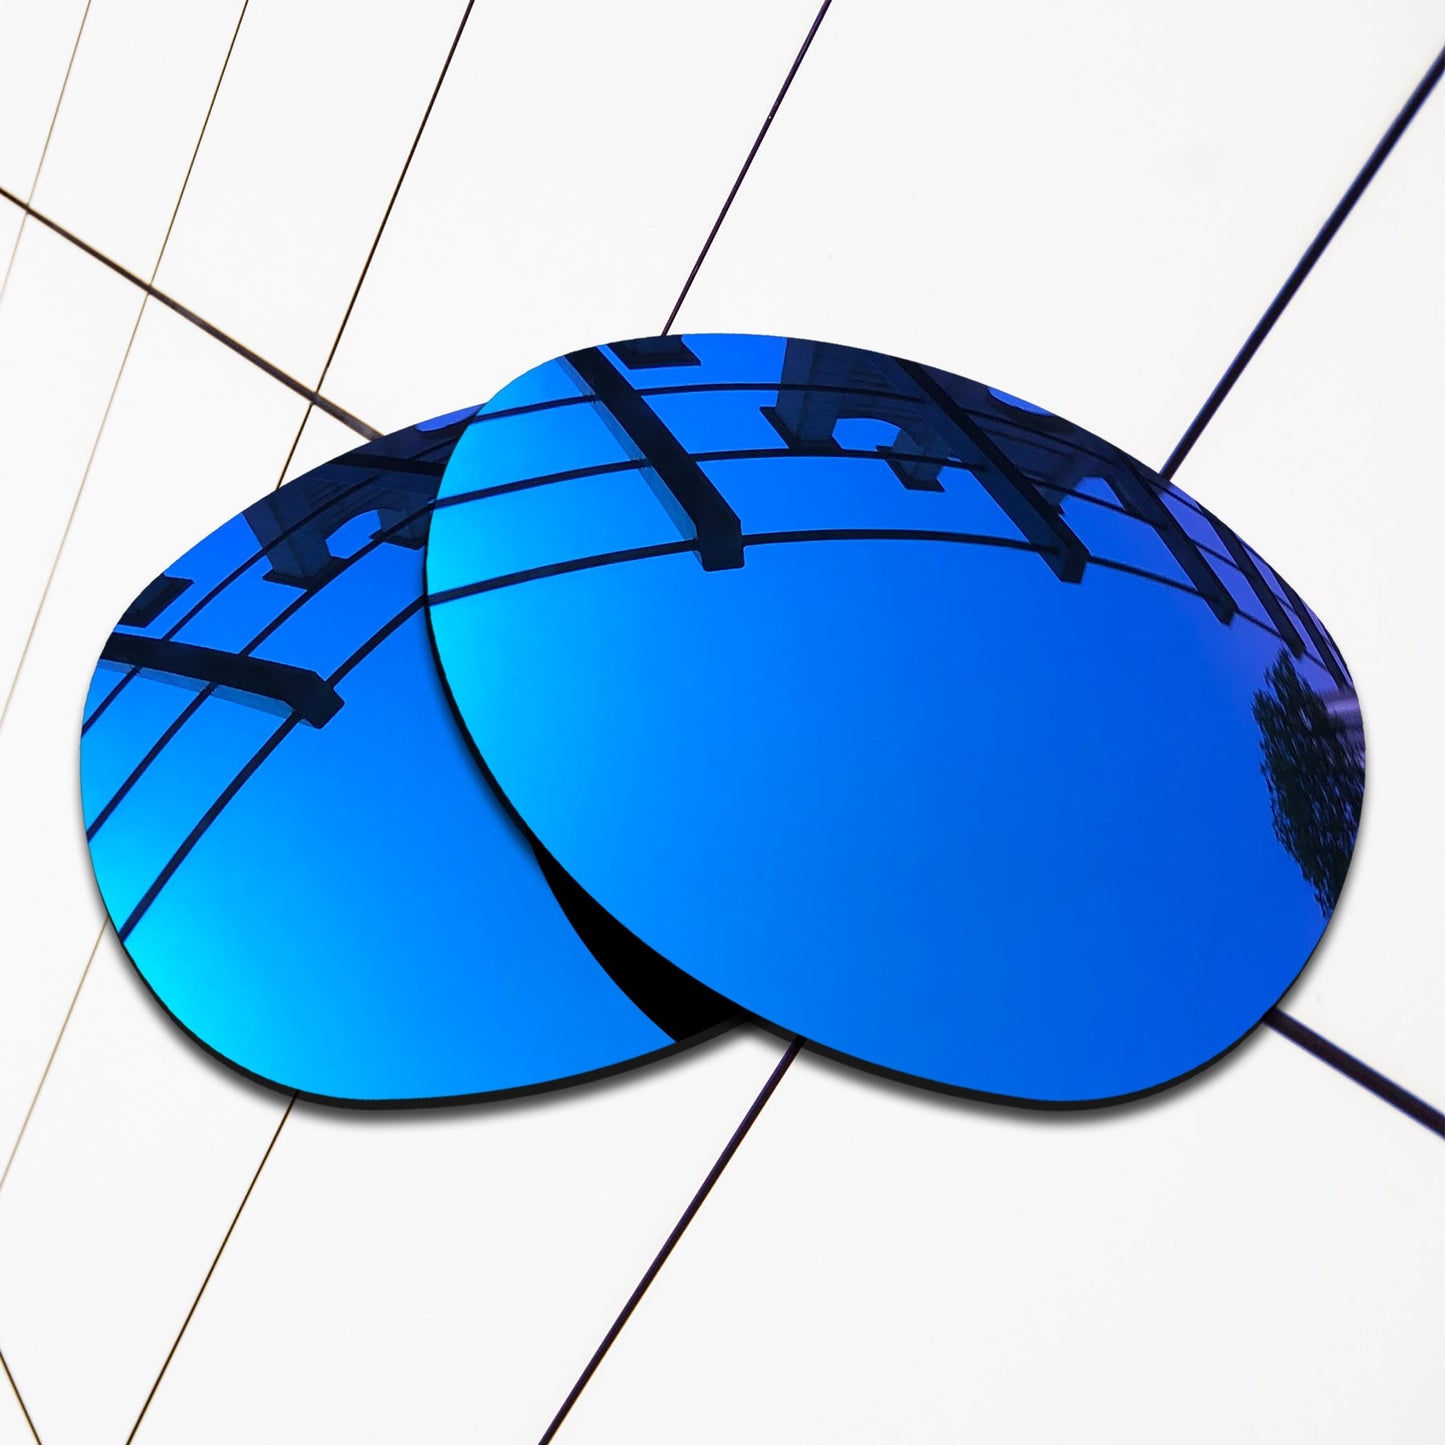 Polarized Replacement Lenses for Oakley Beckon Sunglasses